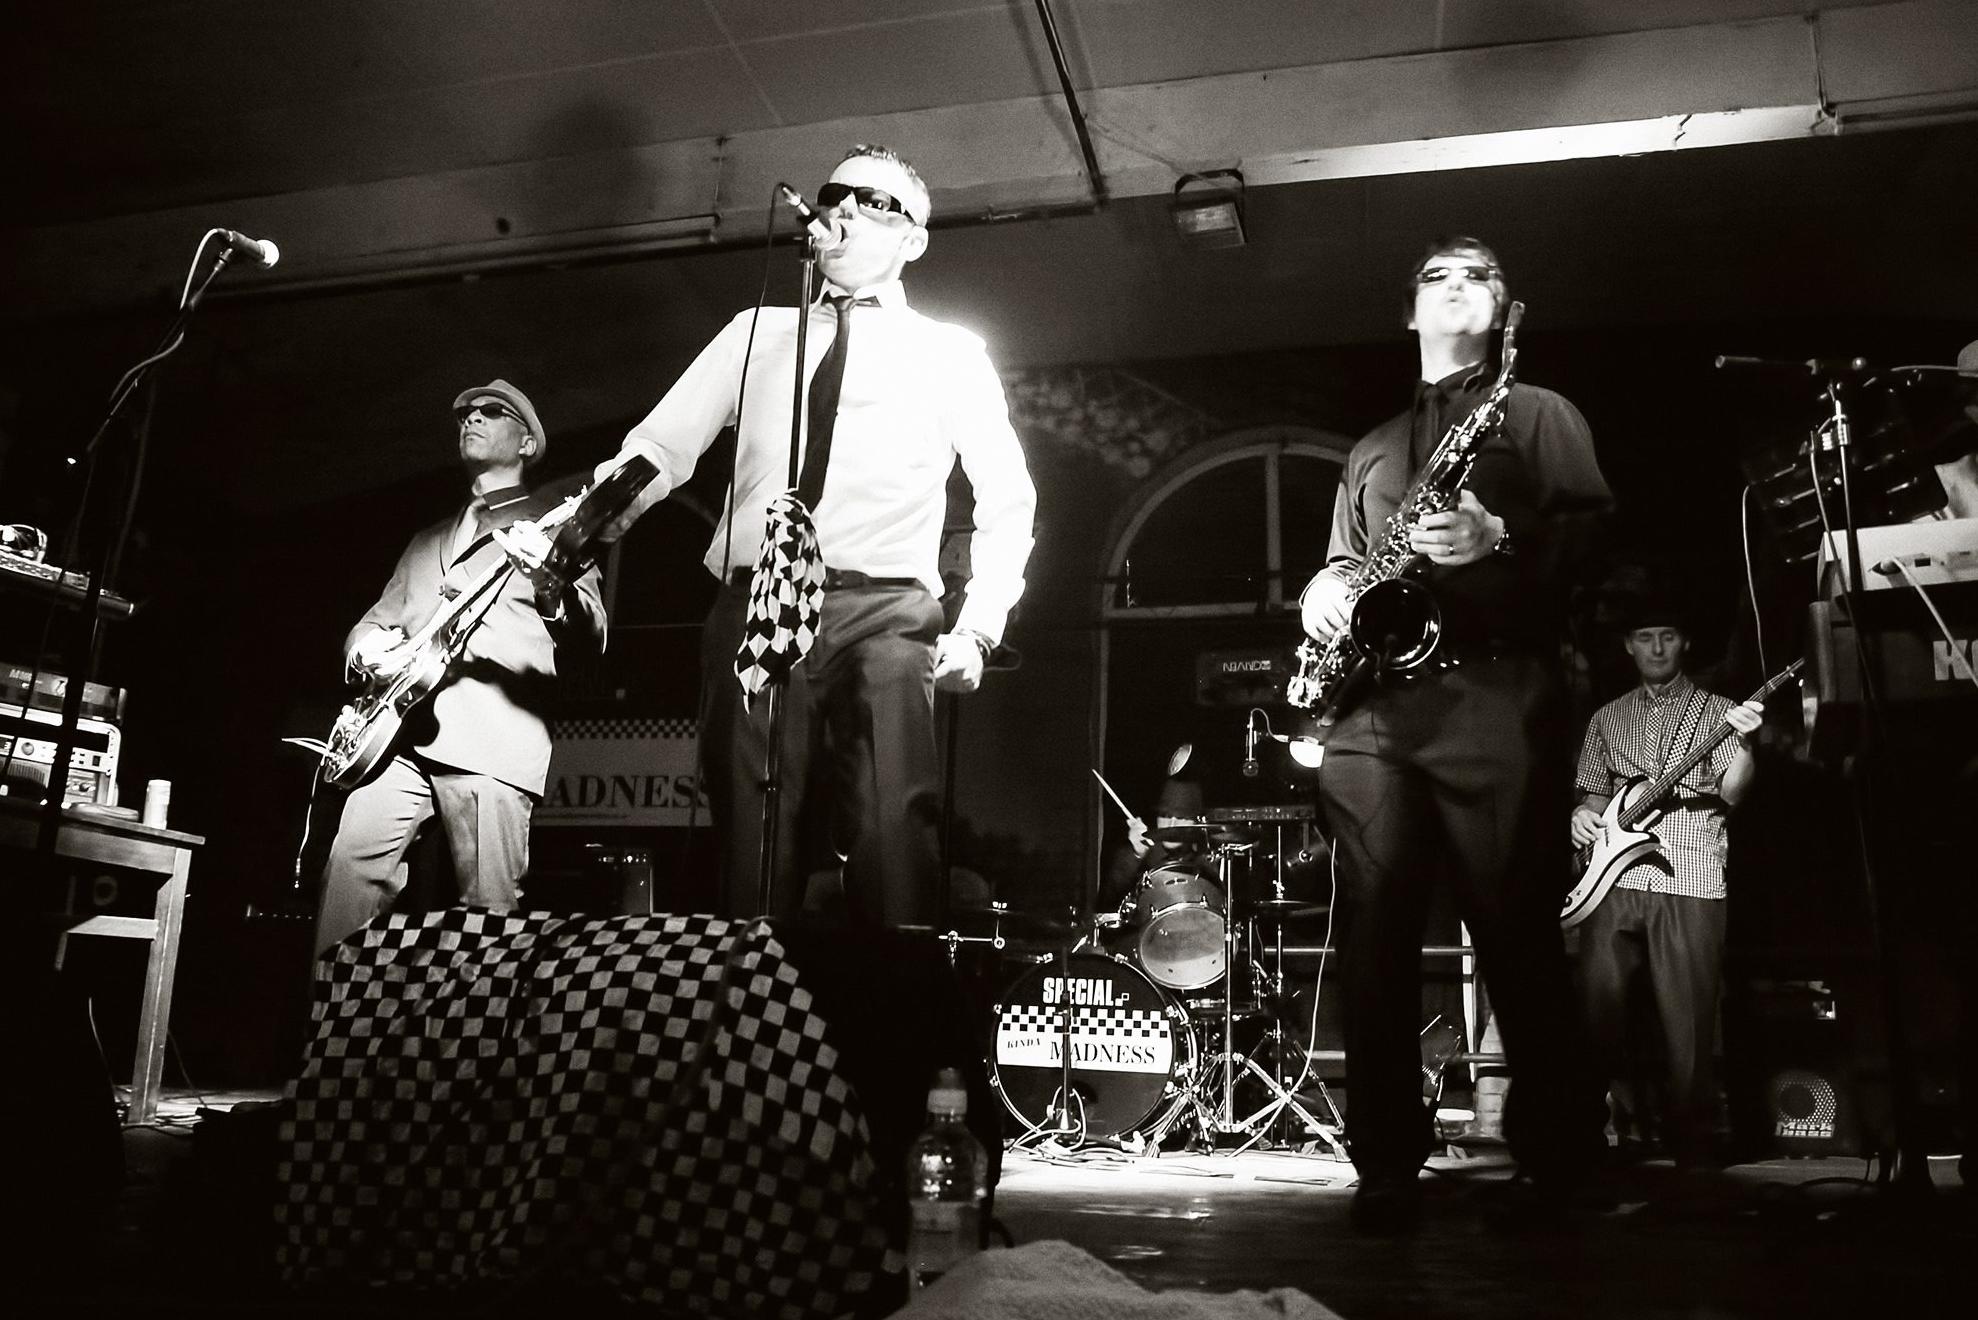 Special Kinda Madness & TheBeat gb play Leeds Ska Tribute night after sold out show last year